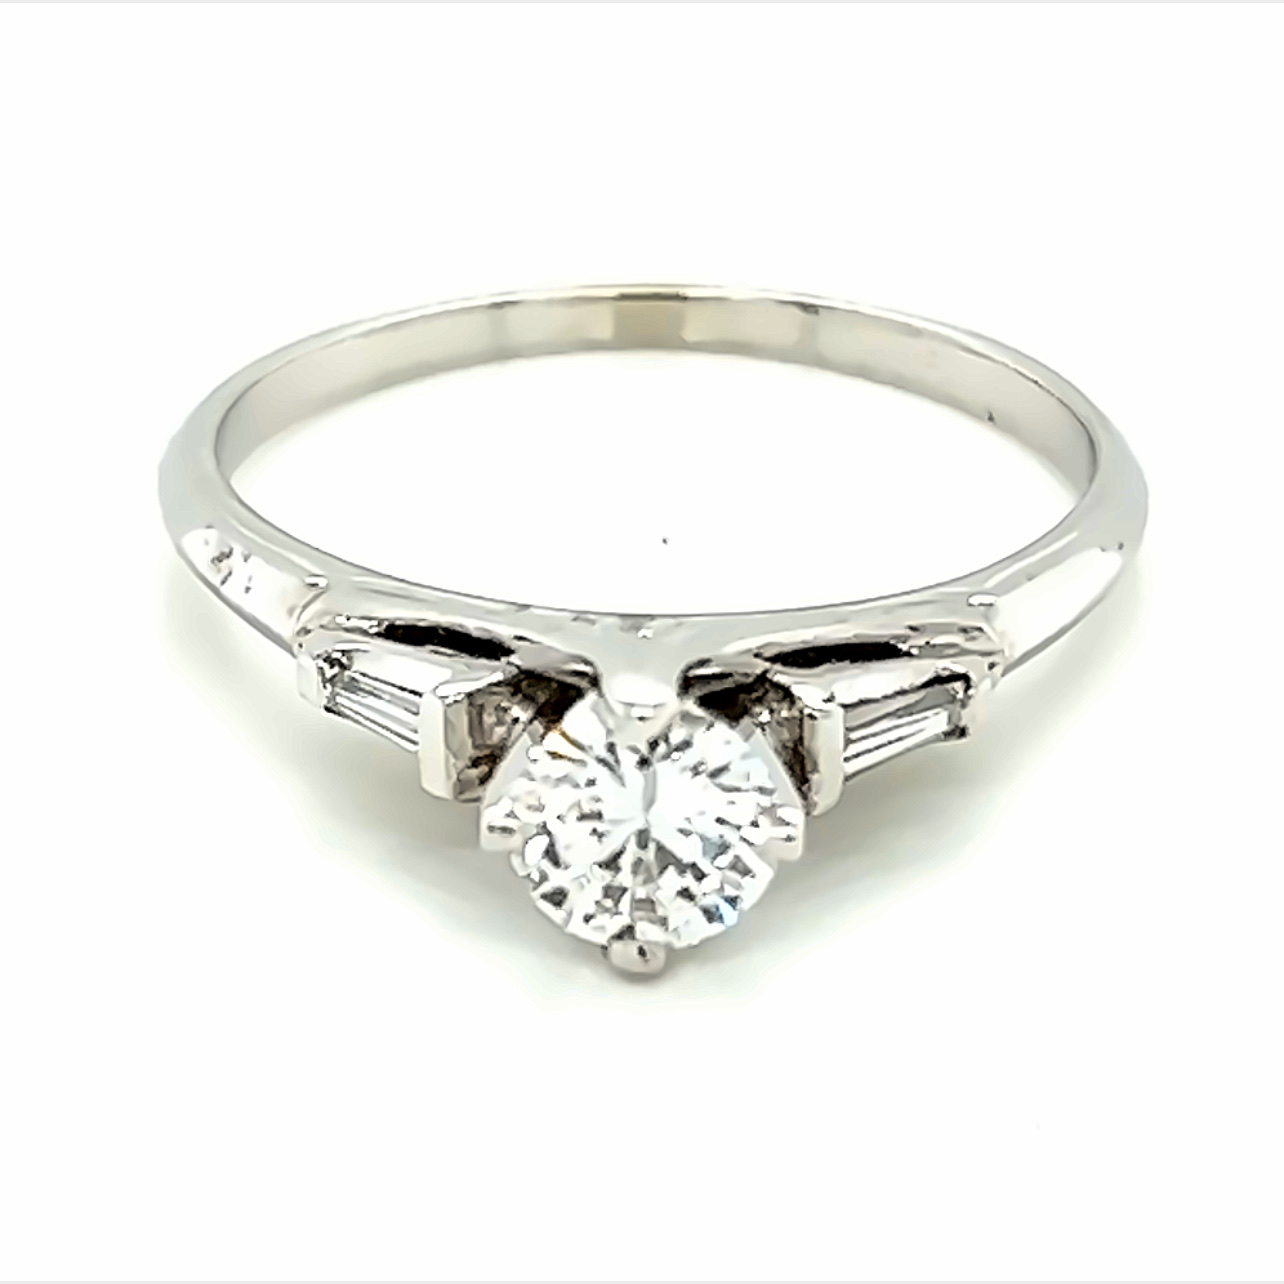 14 Karat White Gold Engagement Ring with One 0.45ct Round Brilliant K VS1 Diamond and  2=0.10tw Baguette G VS Diamonds.